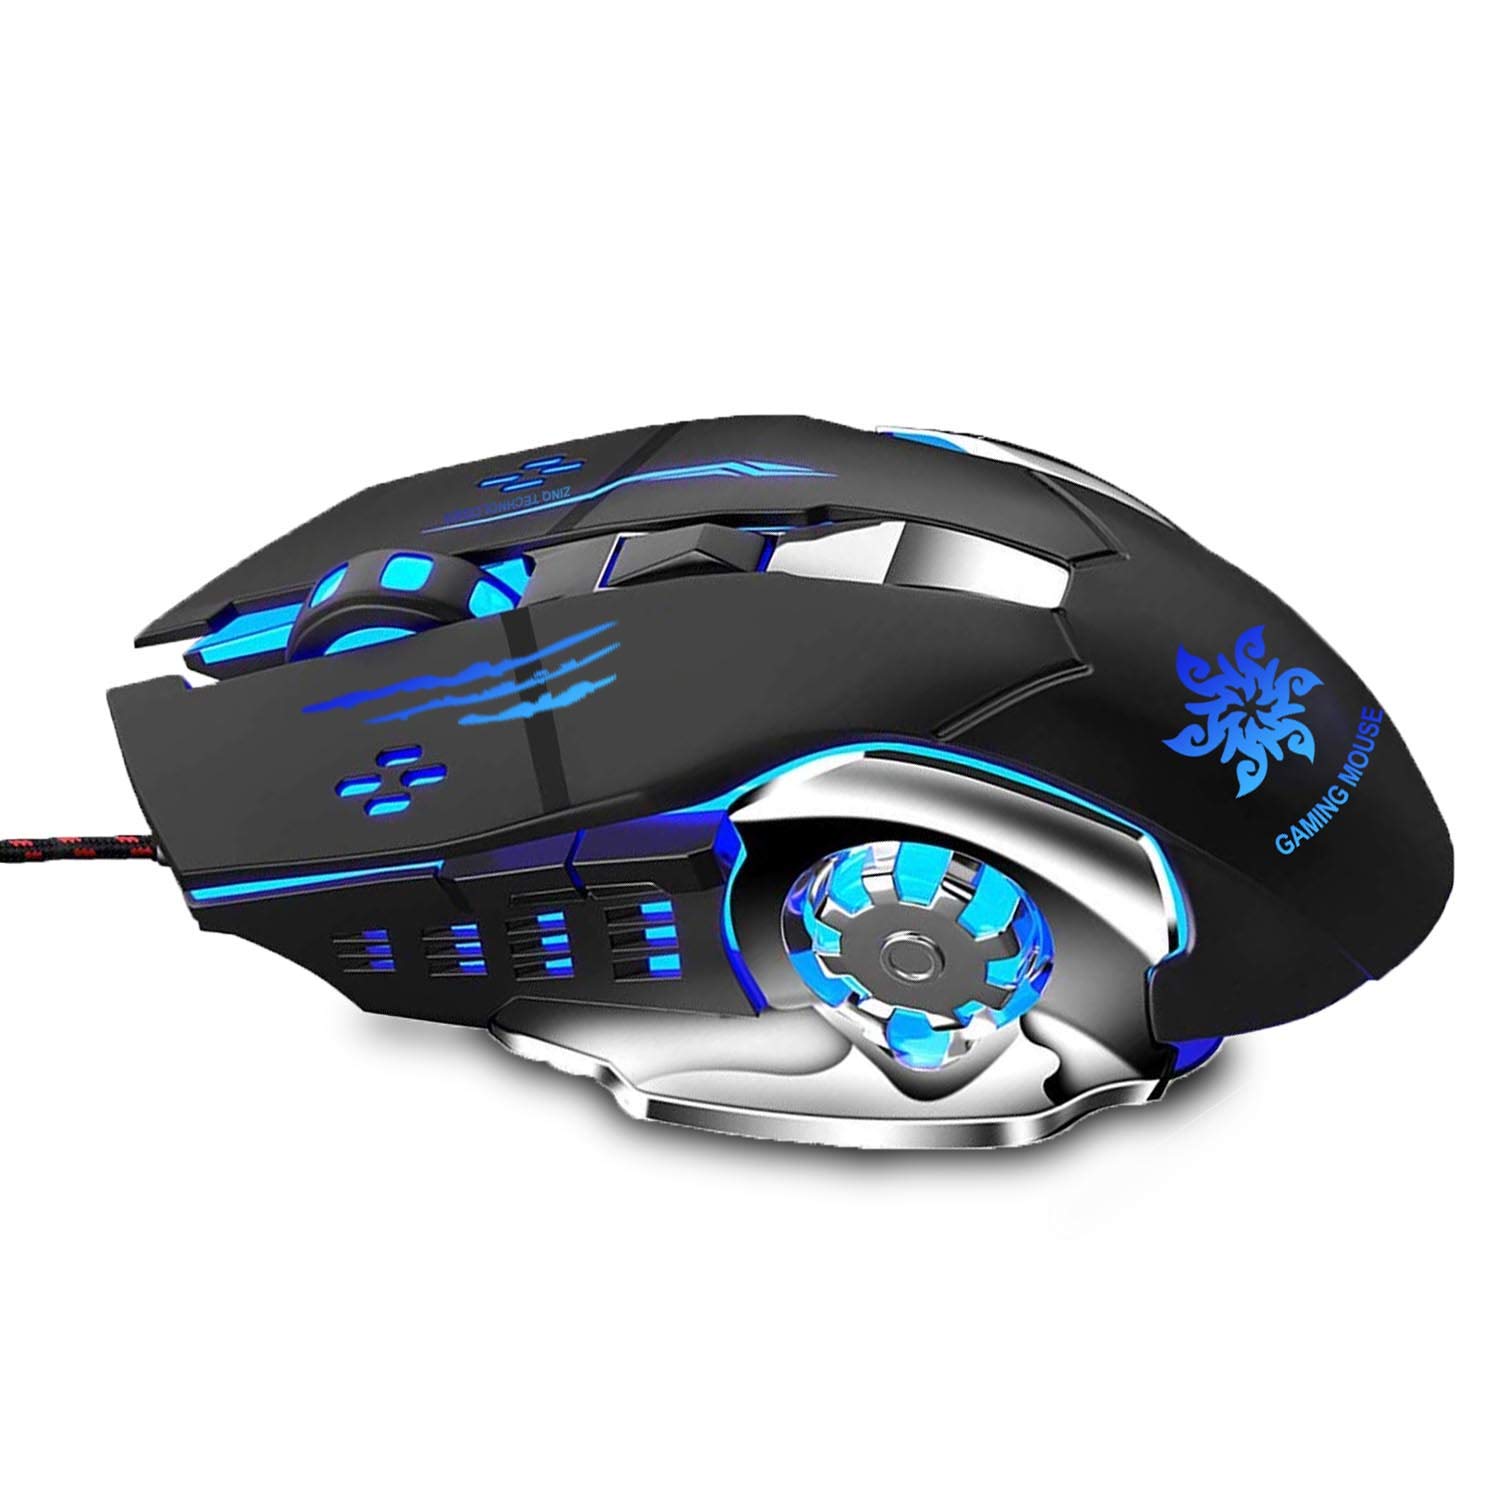 6th gaming mouse 1